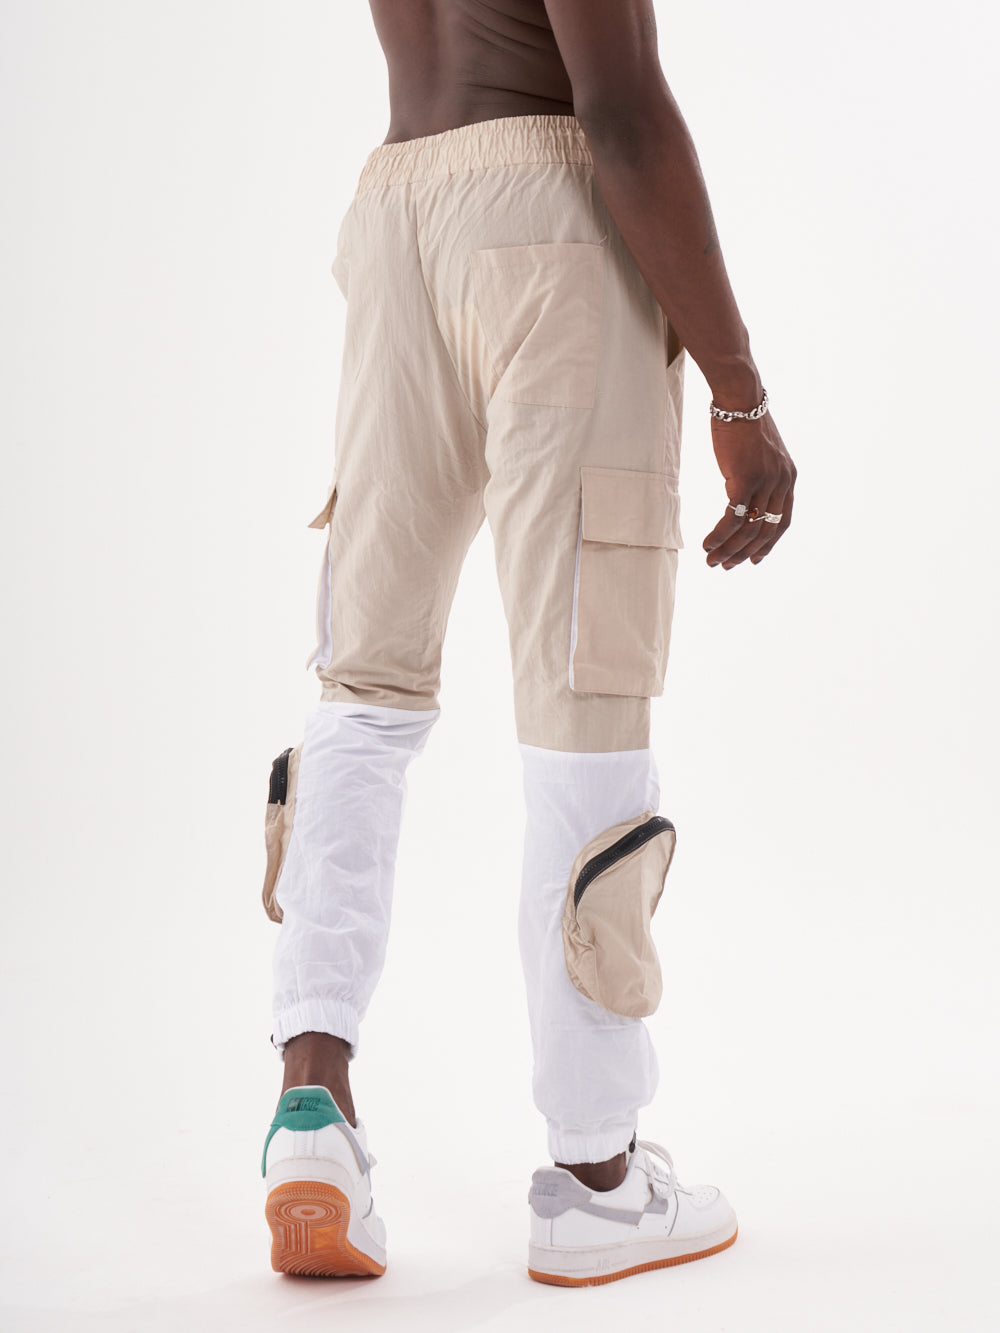 The back view of a man wearing RENEGADE | BEIGE cargo pants.